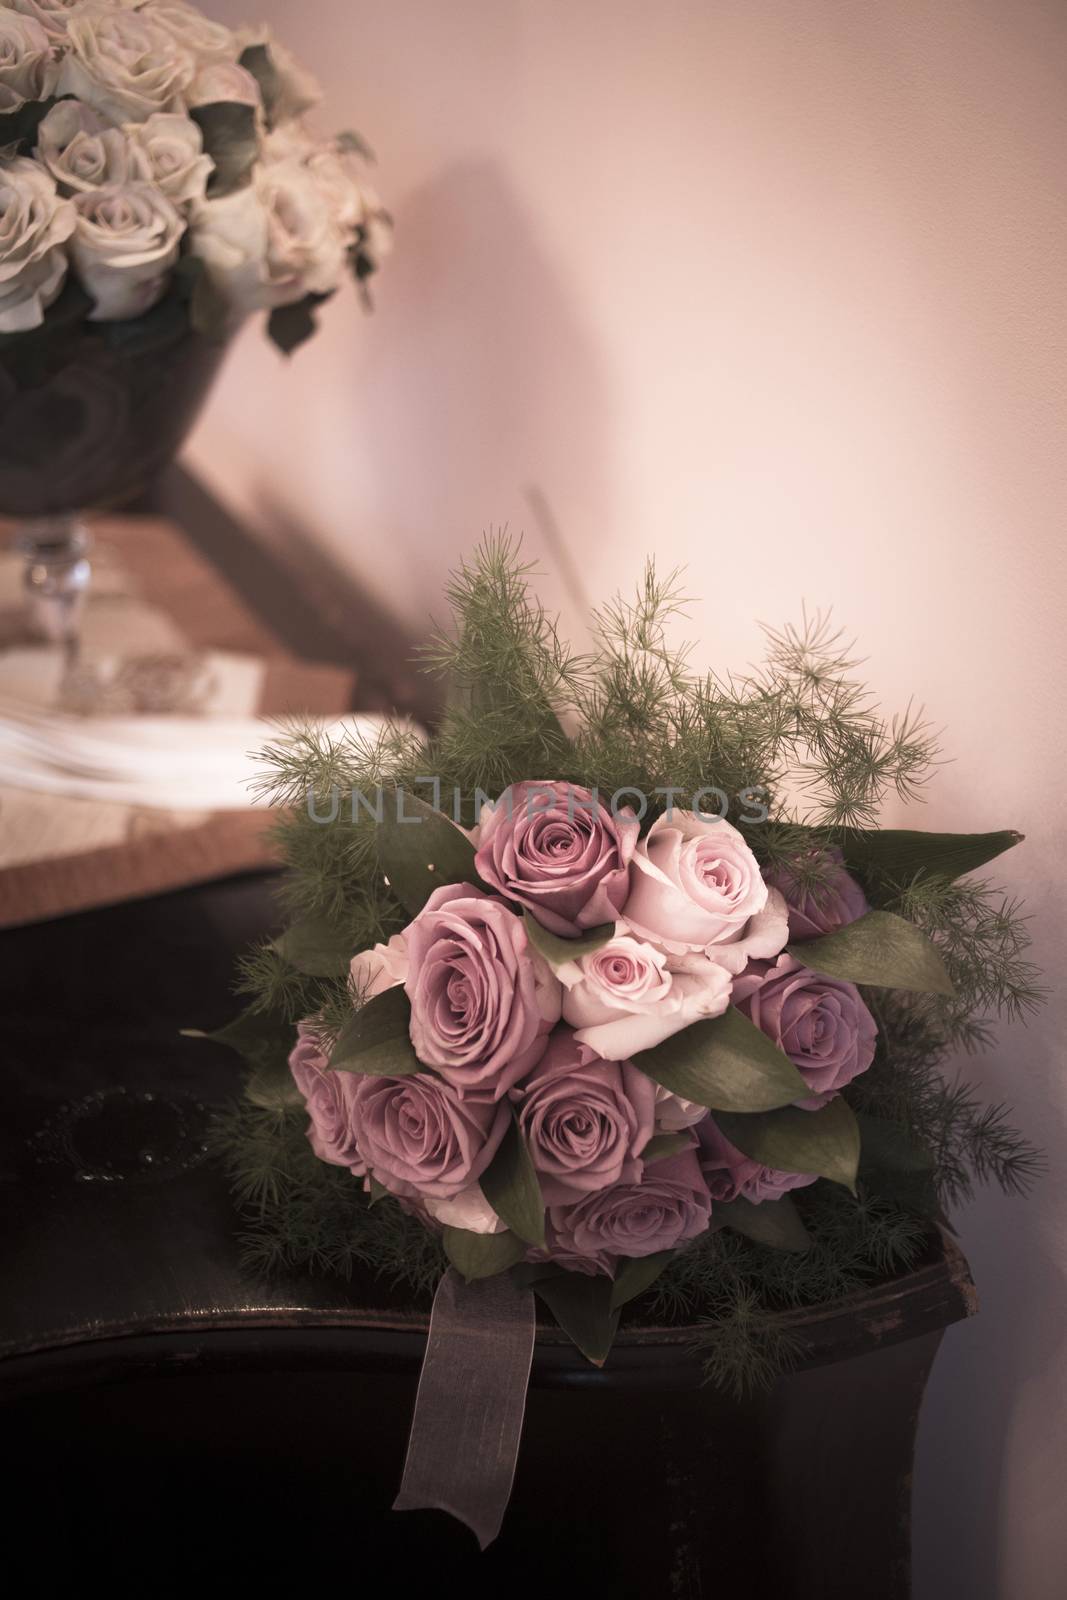 Color artistic digital rectangular vertical photo of the bride's bridal and bridesmaid's bouquets of flowers including white white and pink roses before marriage ceremony in Spain. Shallow depth of with background out of focus. 